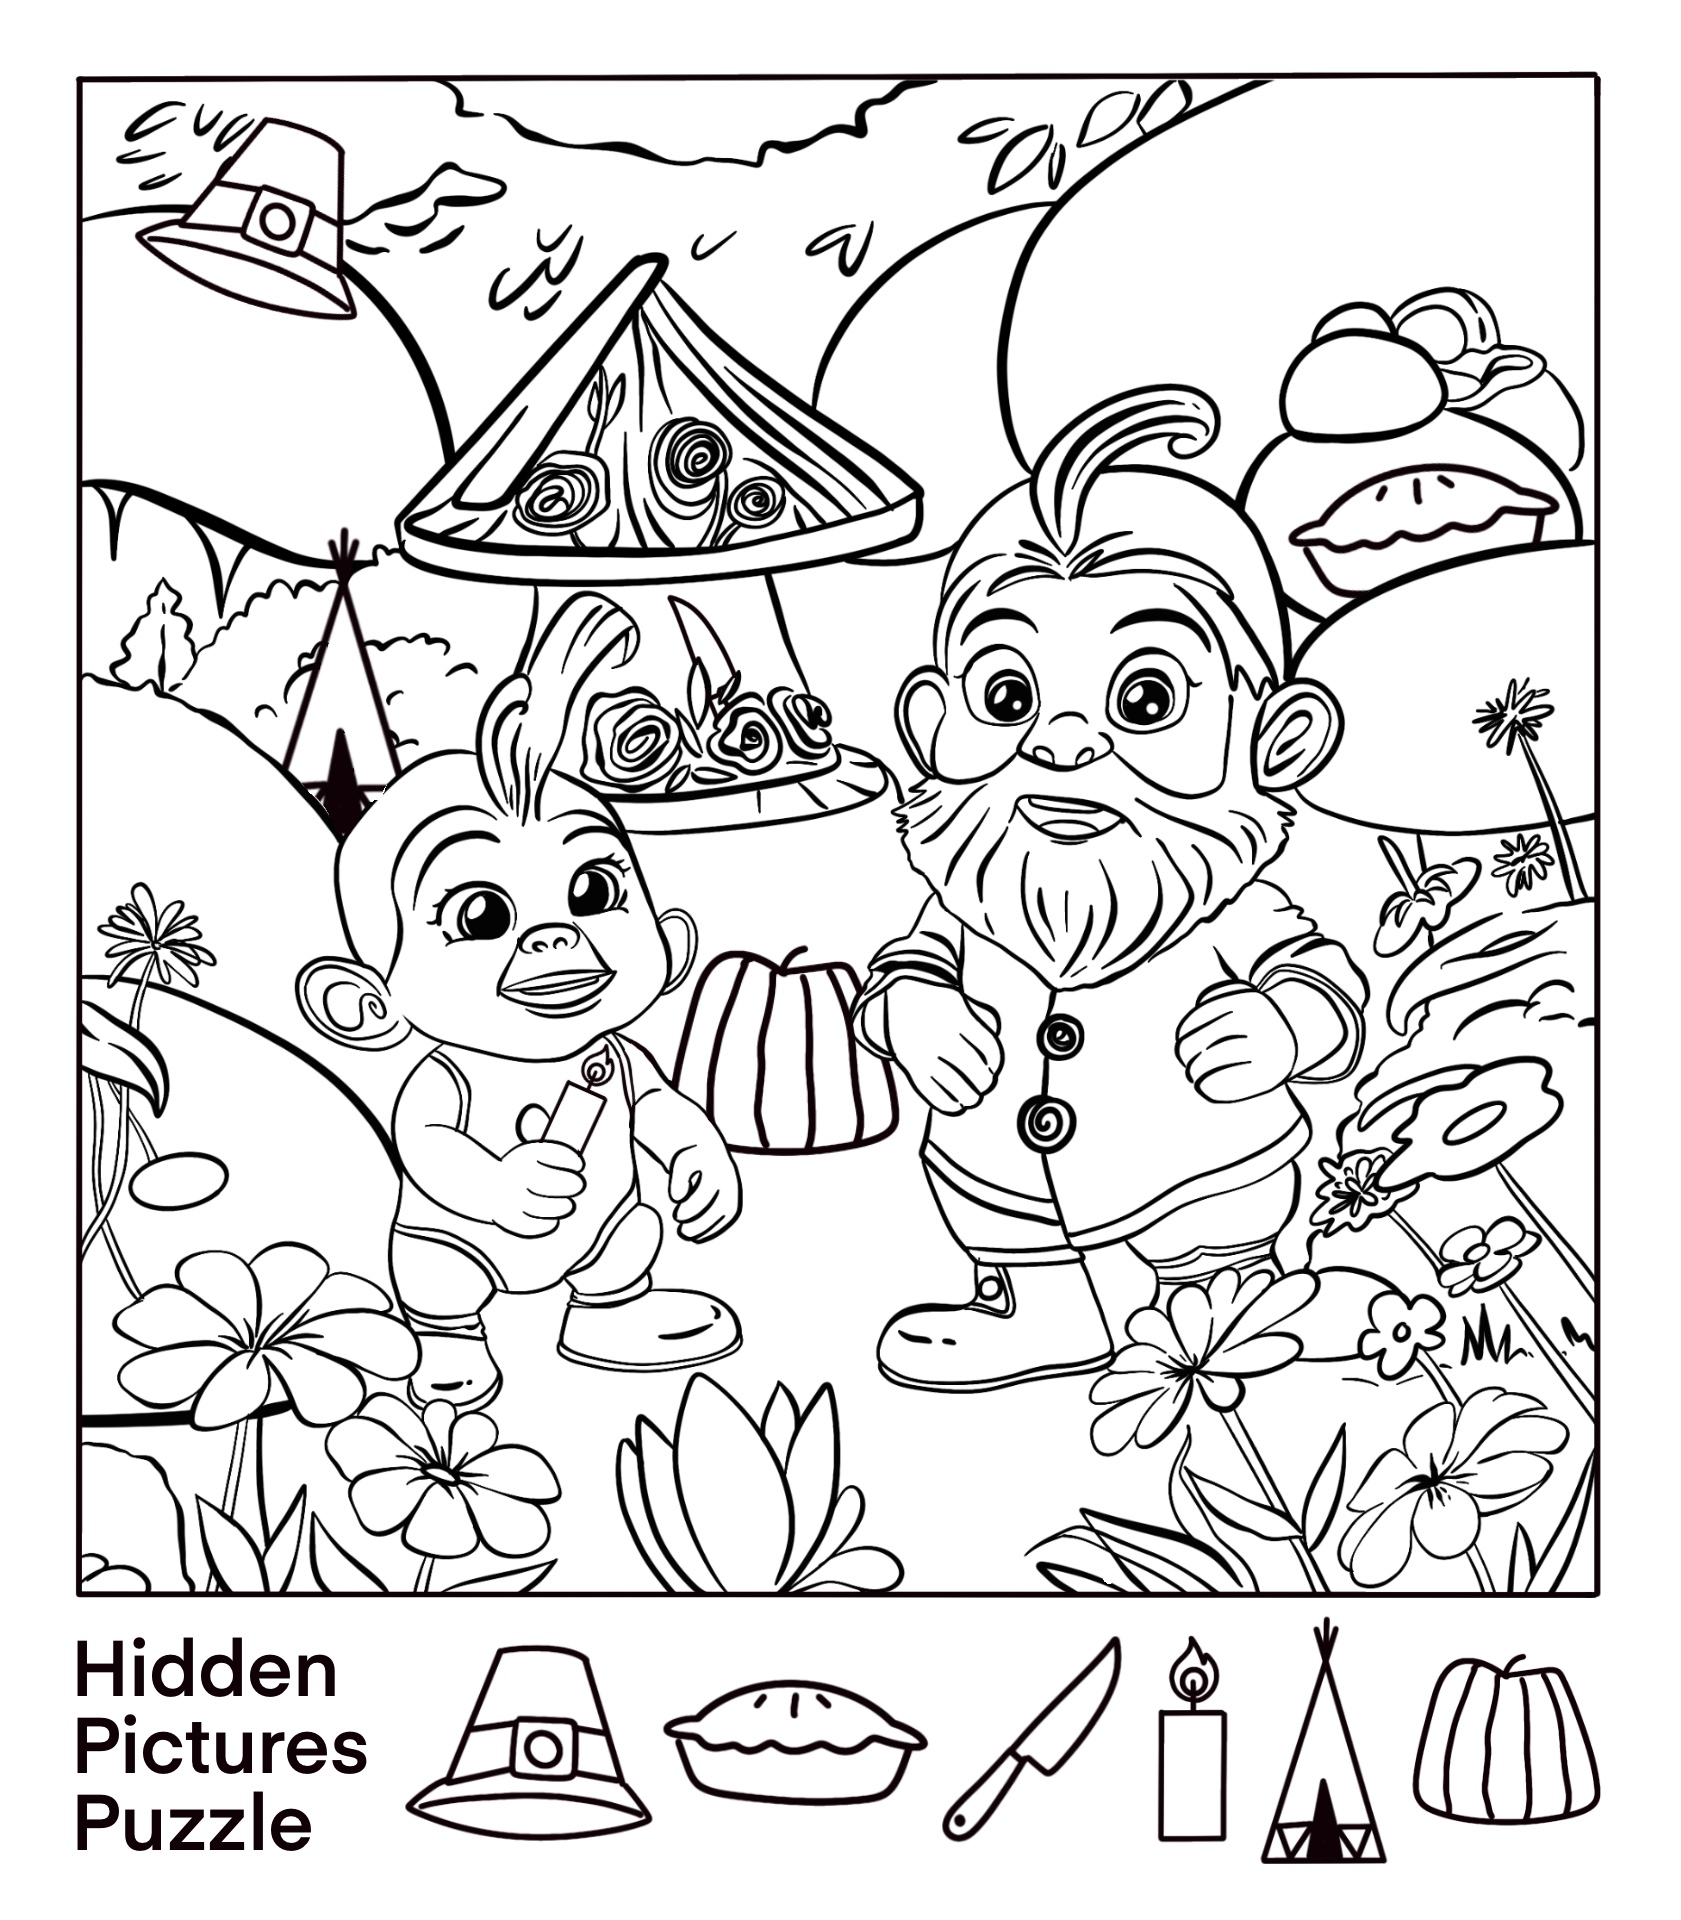 hidden-objects-in-pictures-printables-printable-world-holiday